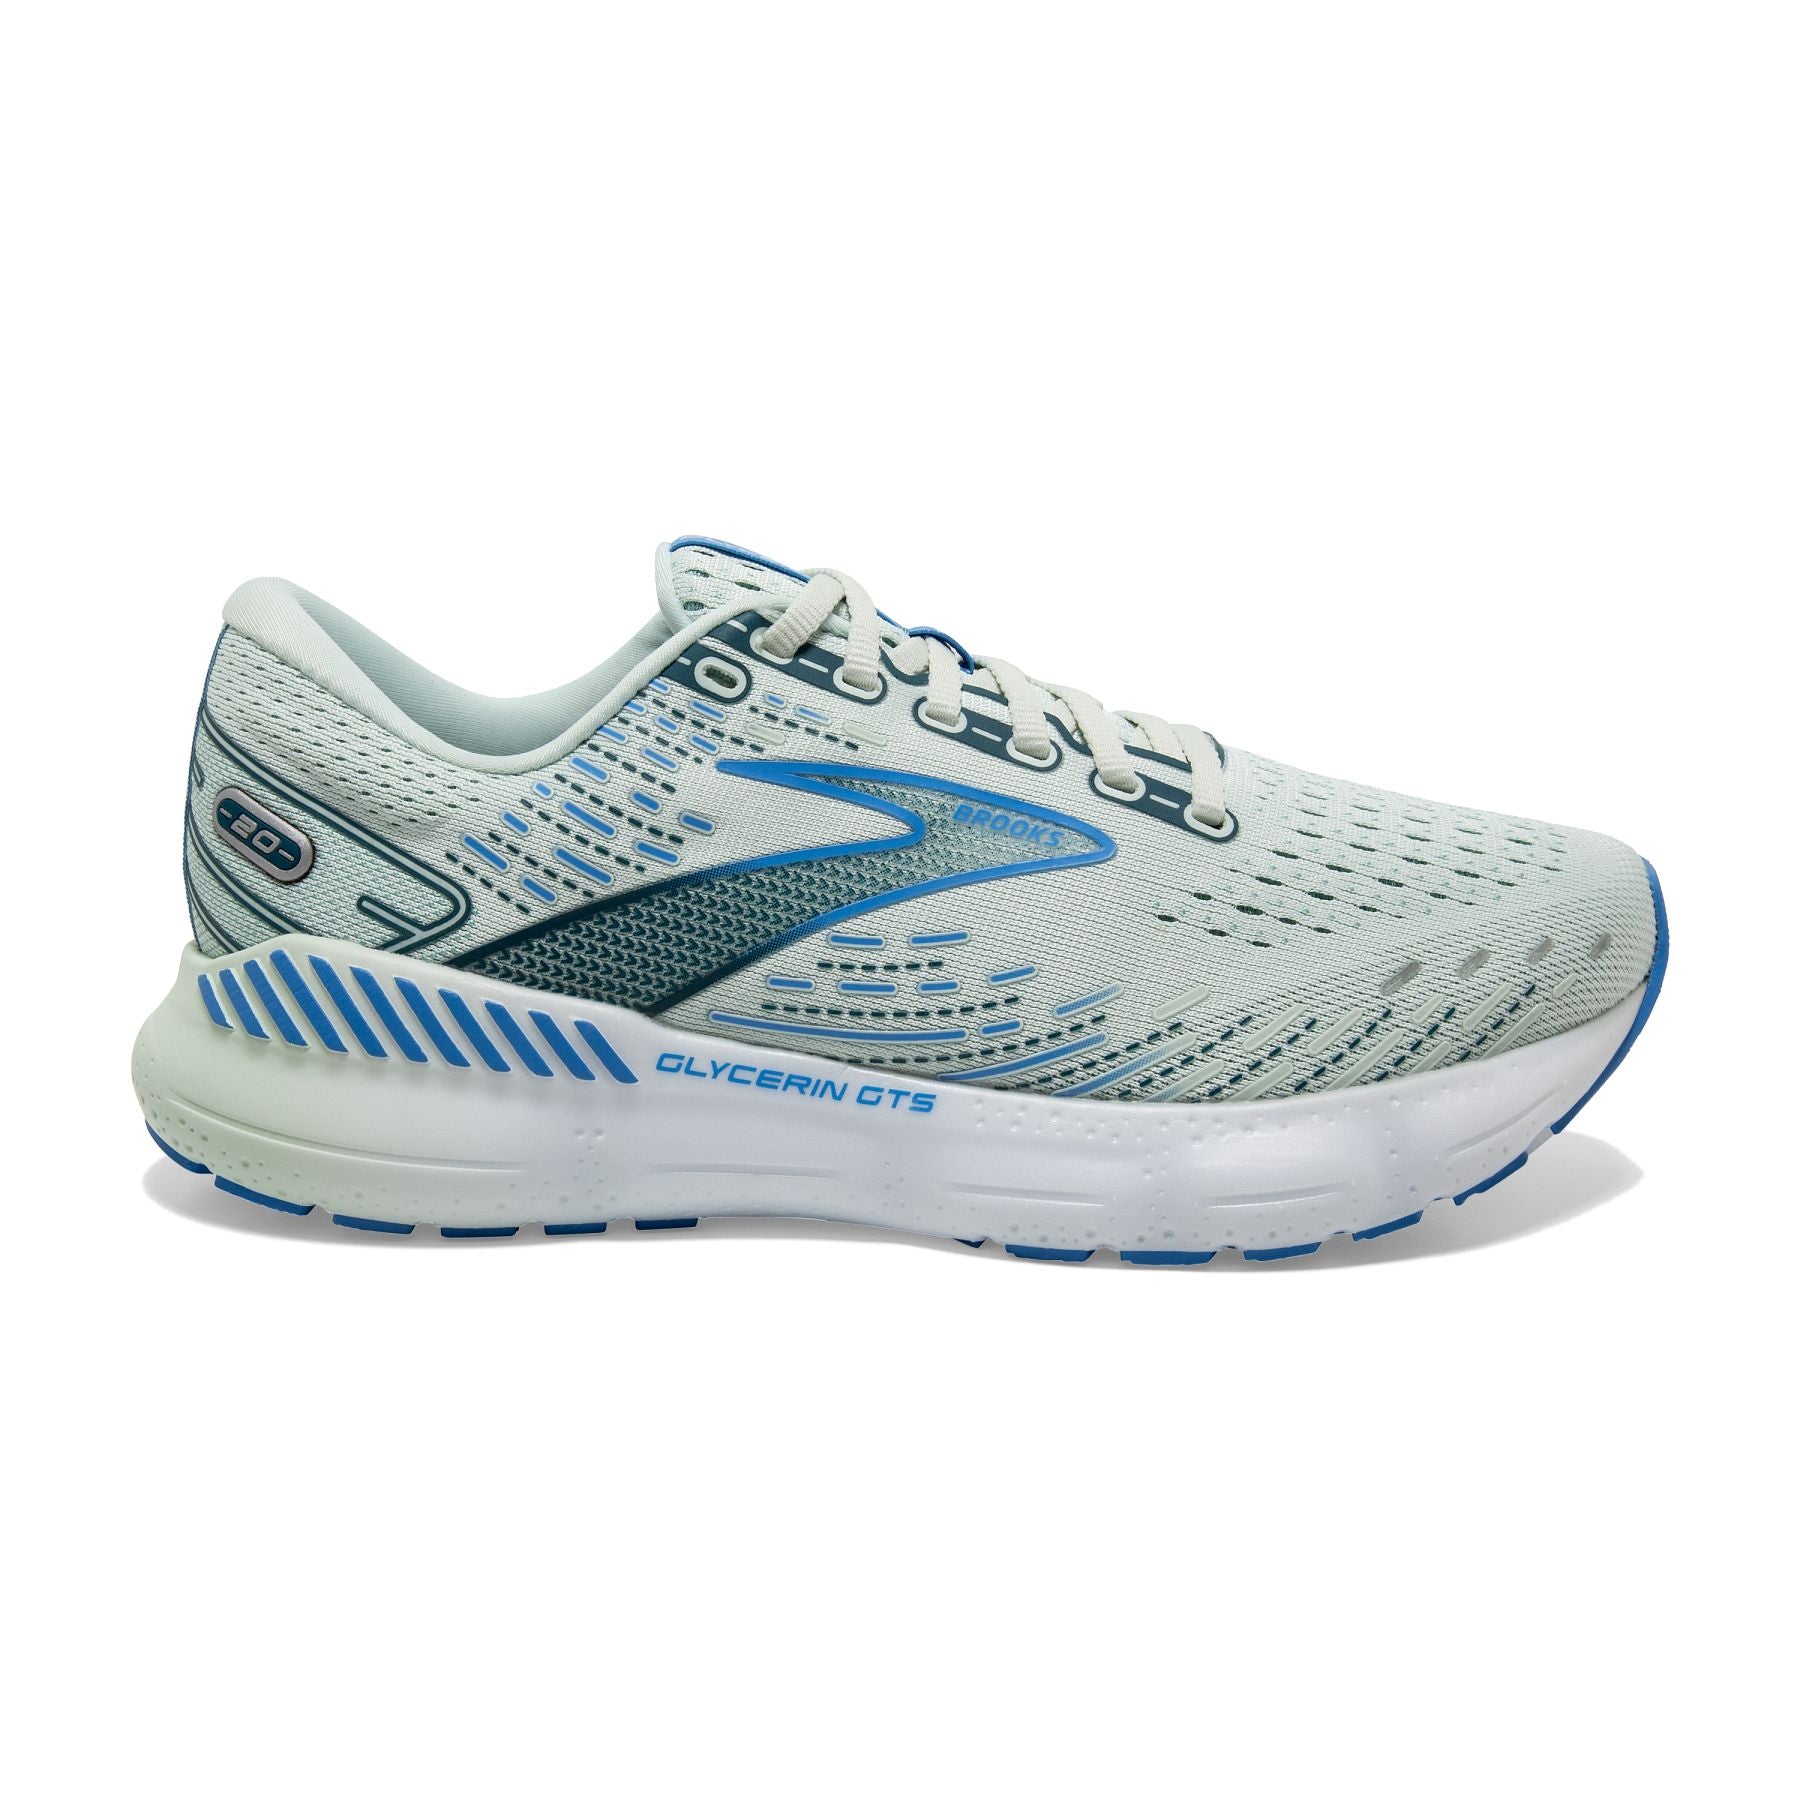 Lateral view of the Women's Glycerin GTS 20 by Brook's in the color Blue Glass/Marina/Legion Blue